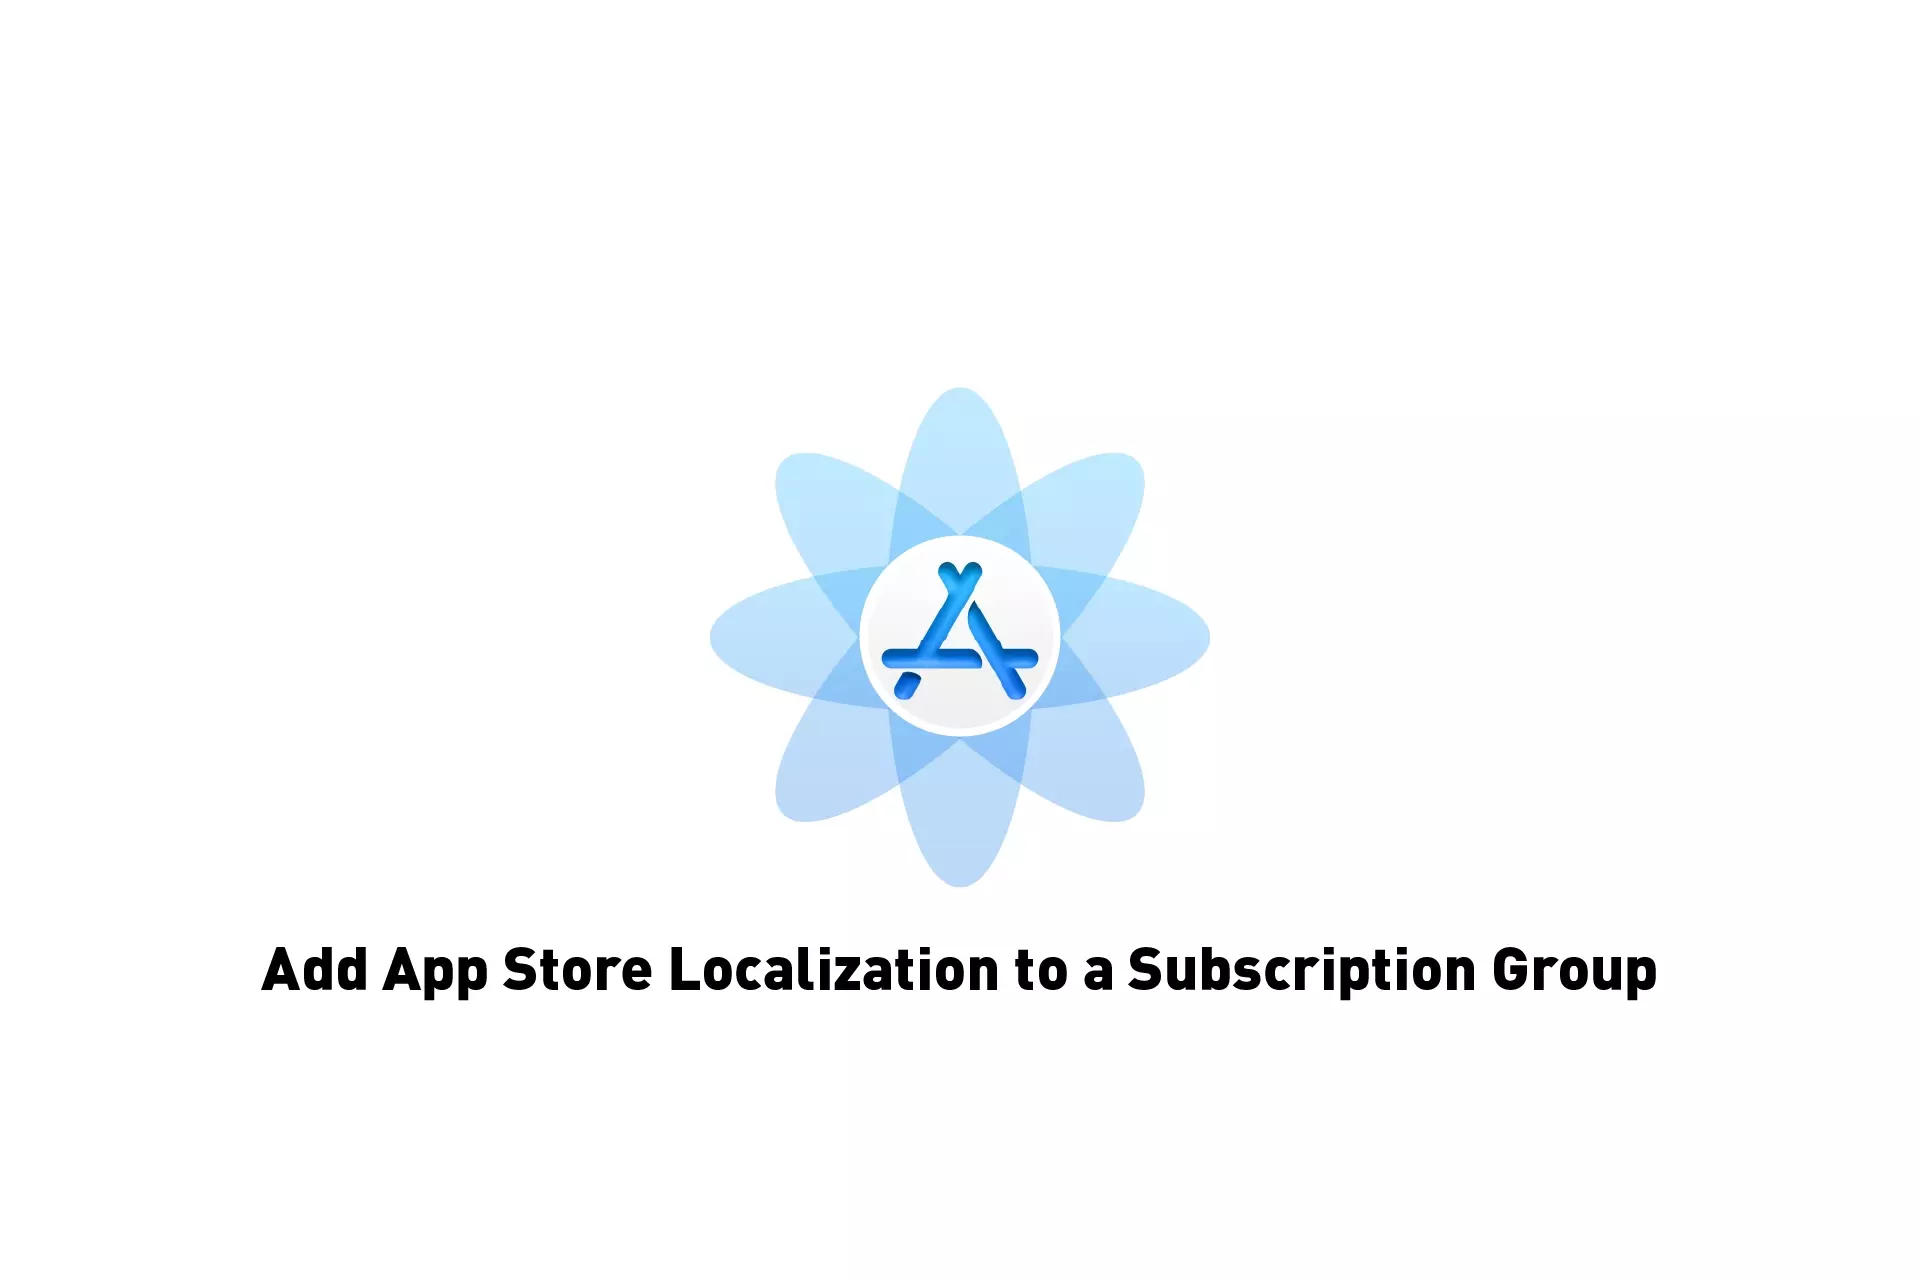 A flower that represents App Store Connect with the text "Add App Store Localizations to a Subscription Group."